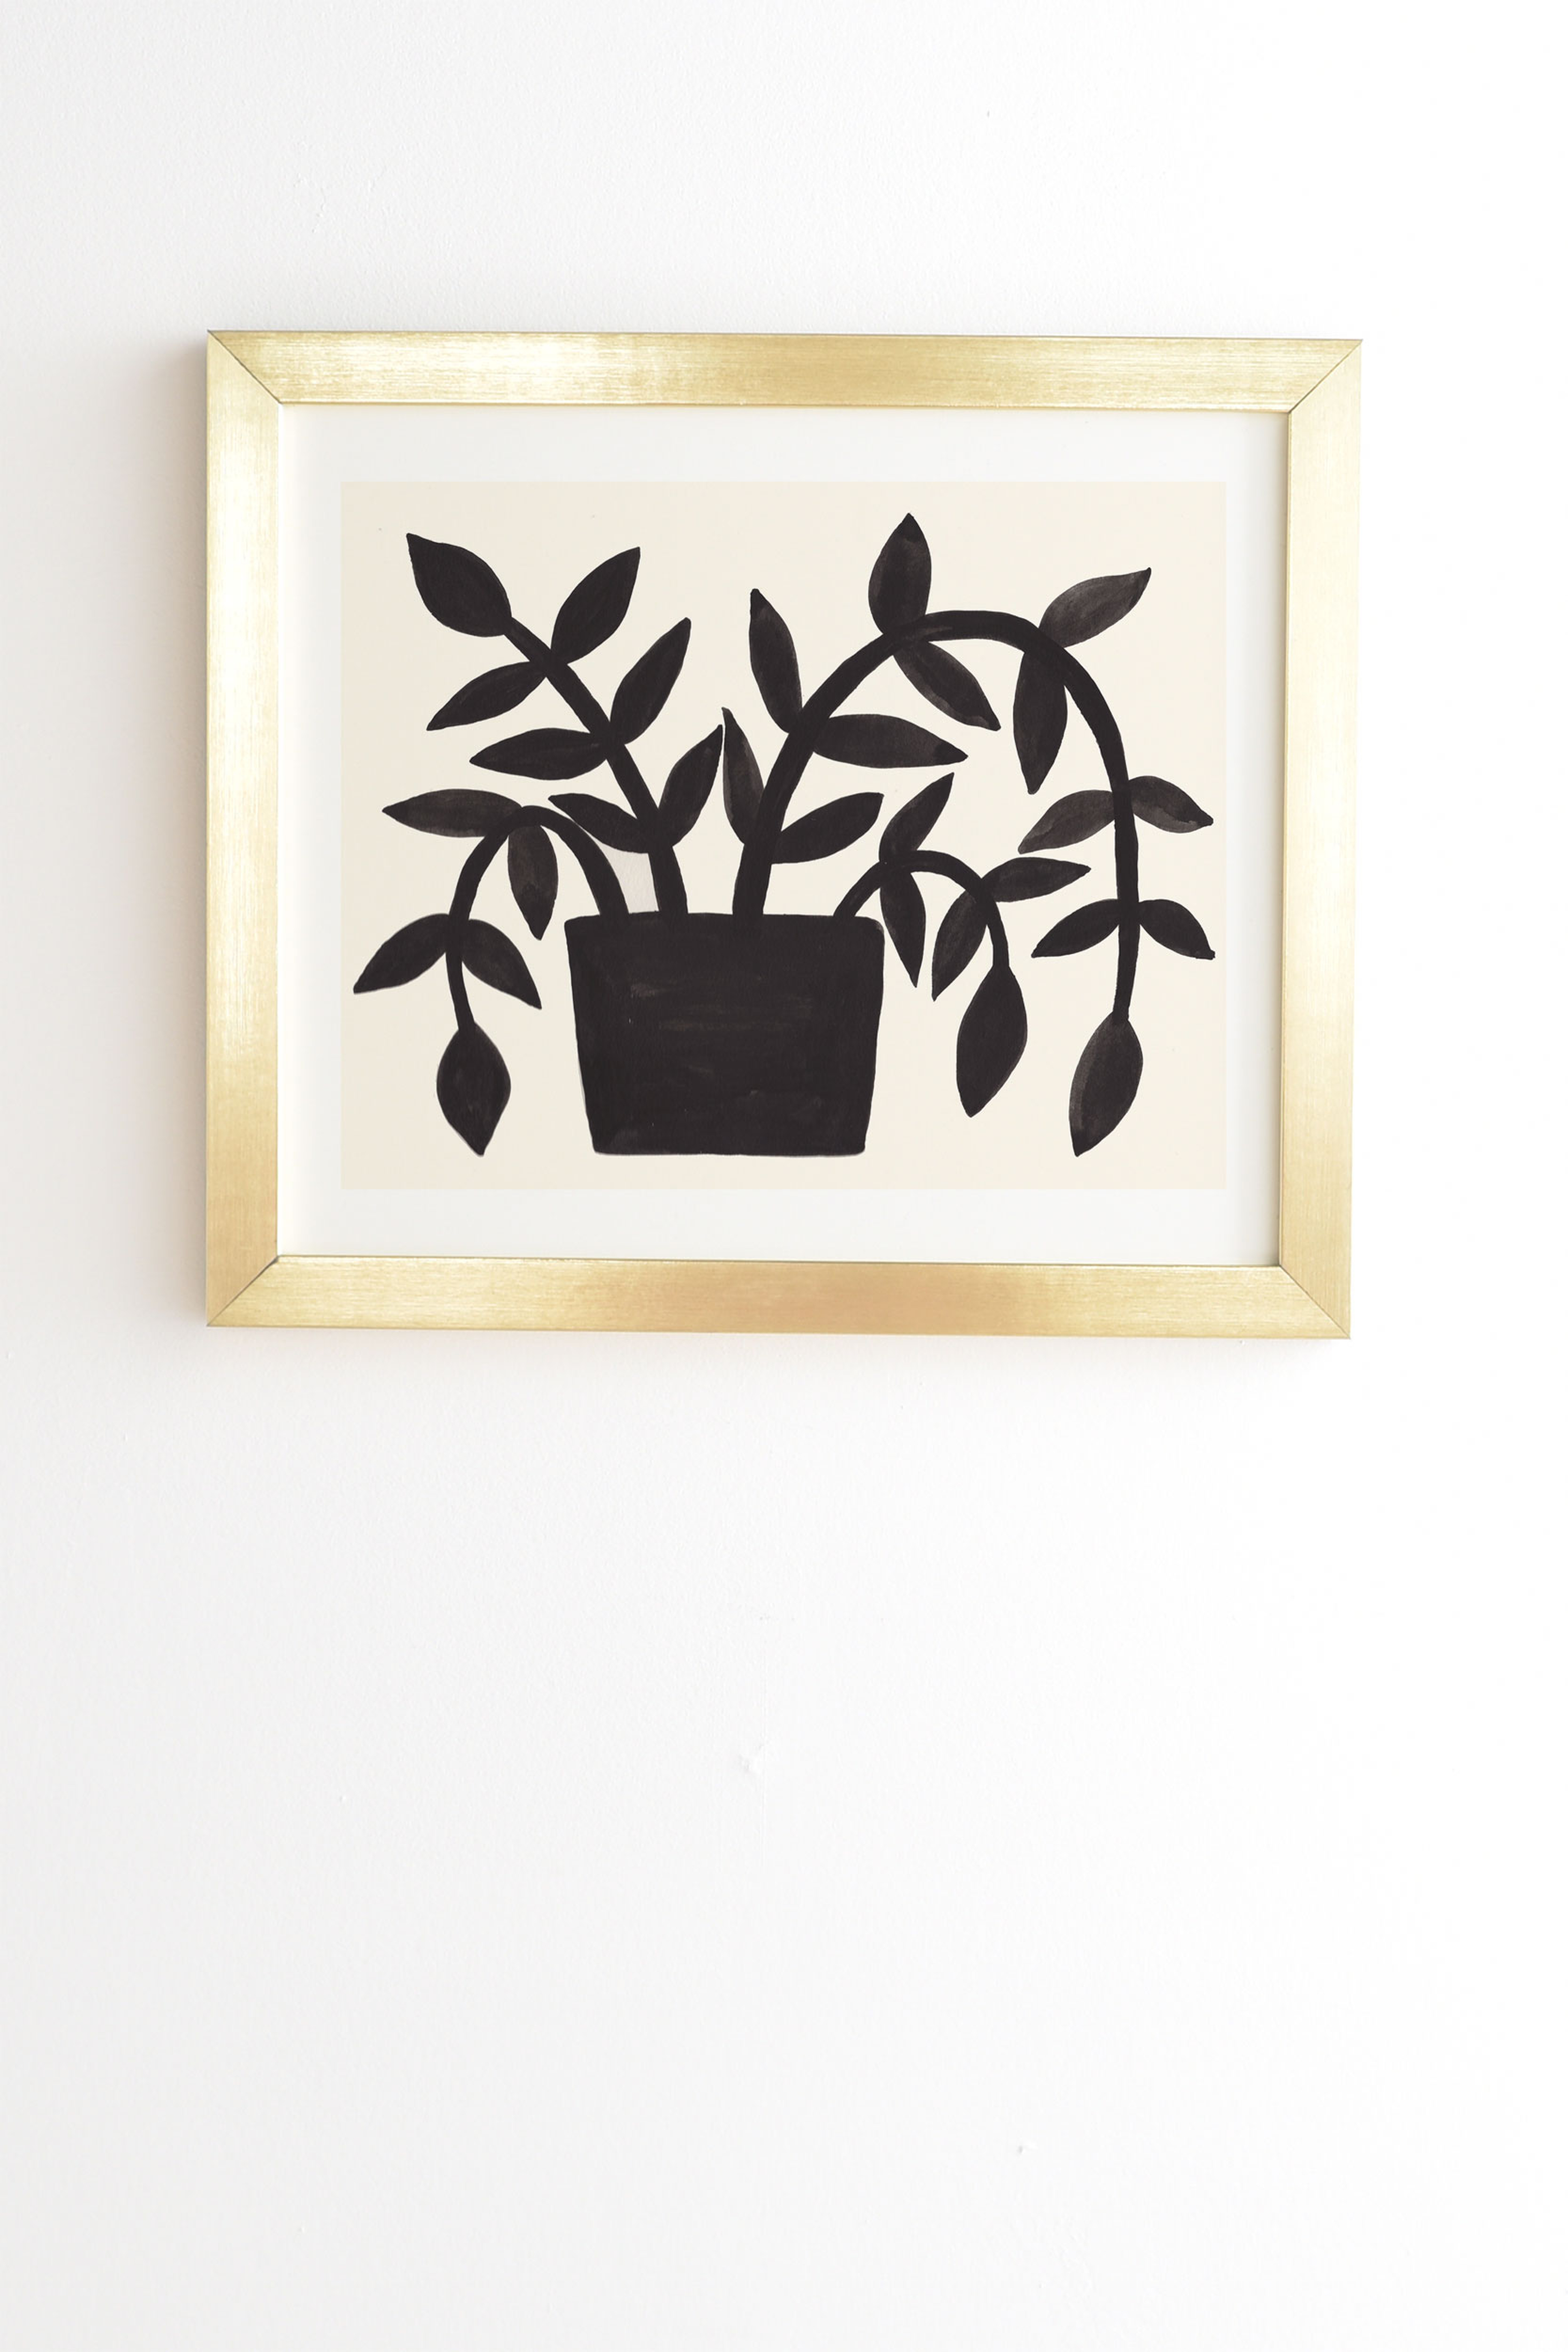 Black Painted Plant by Pauline Stanley - Framed Wall Art Basic Gold 14" x 16.5" - Wander Print Co.